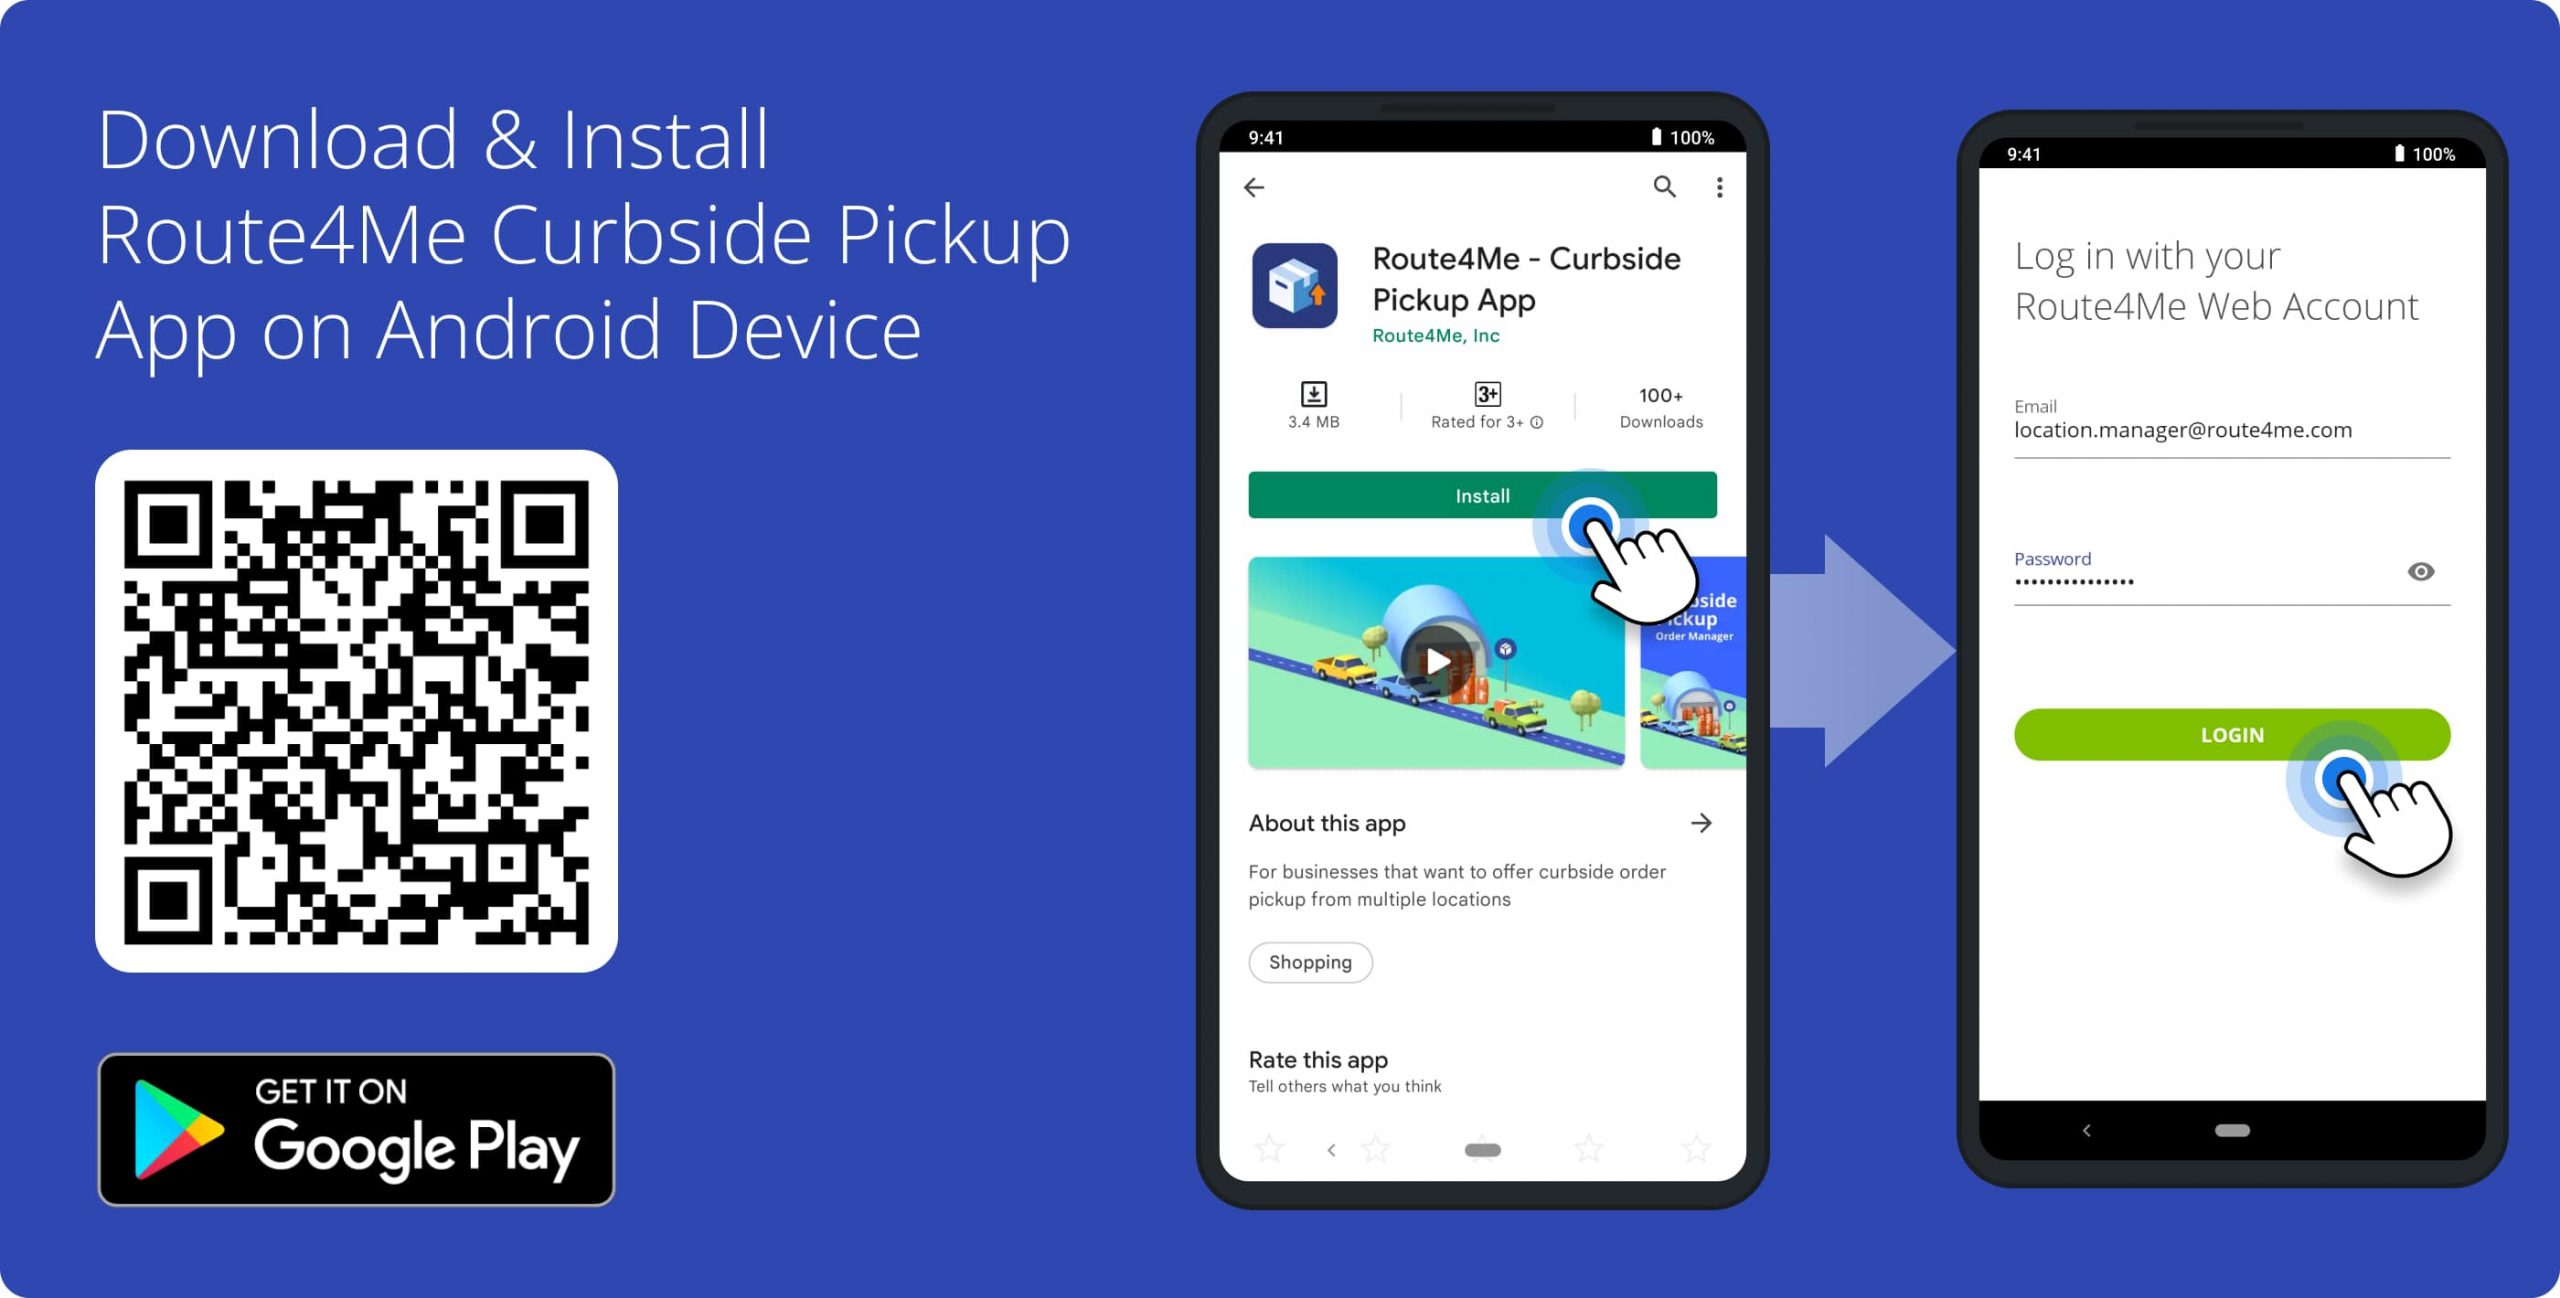 Download and install Route4Me's Mobile Shopify Curbside pickup app on your Android device and connect it to your Shopify store.